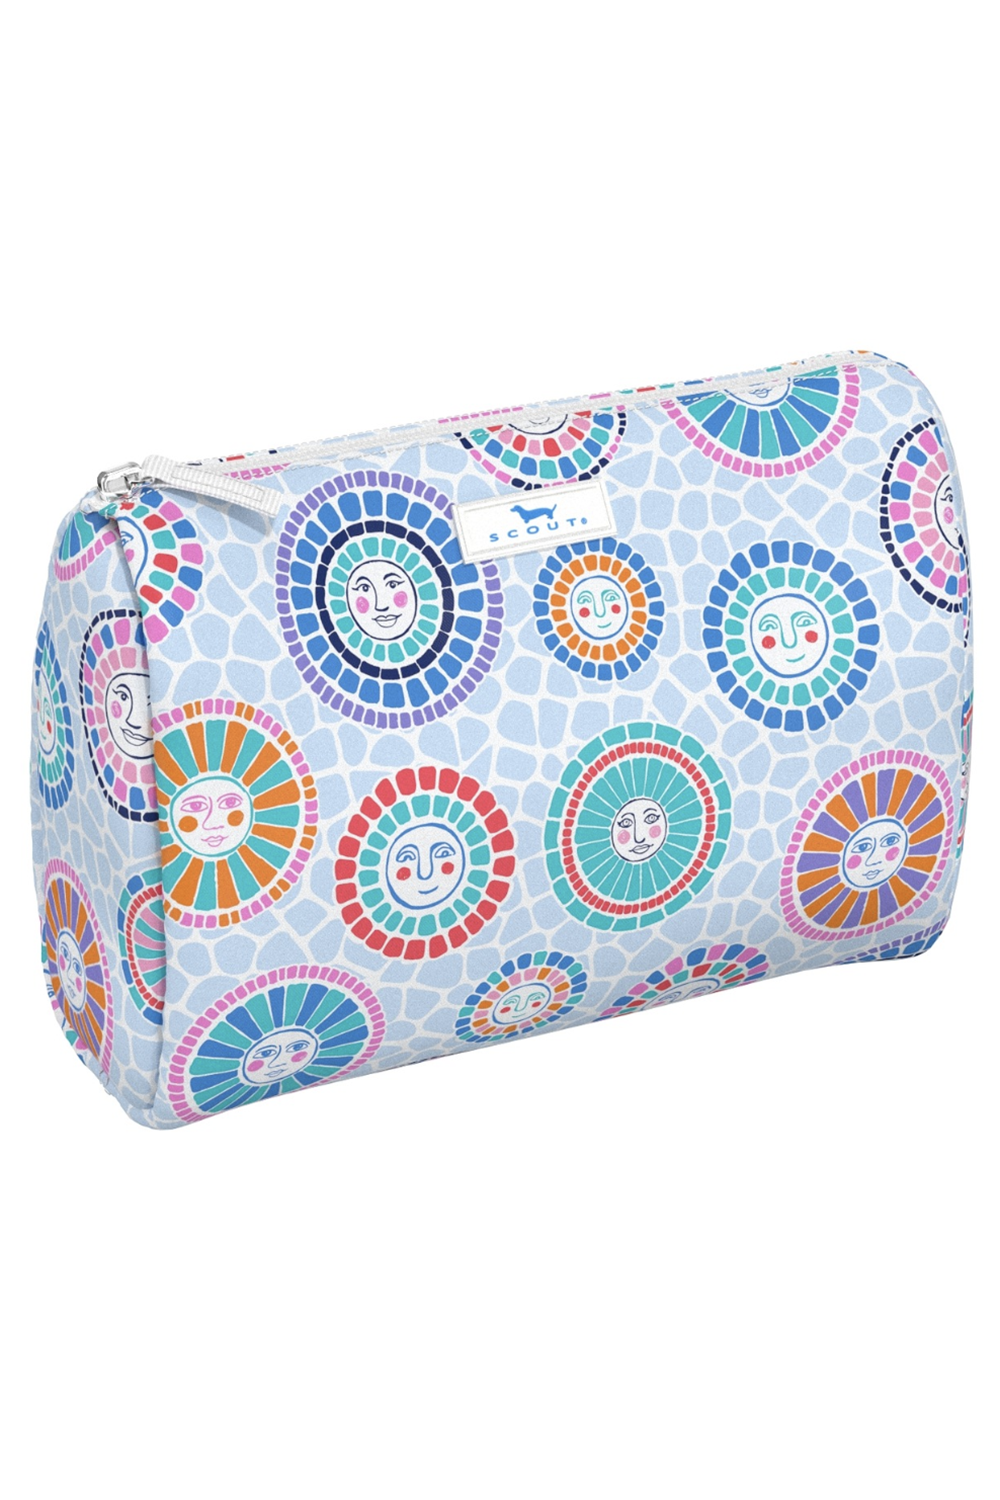 Packin' Heat Cosmetic Bag - "Sunny Side Up" SUM24